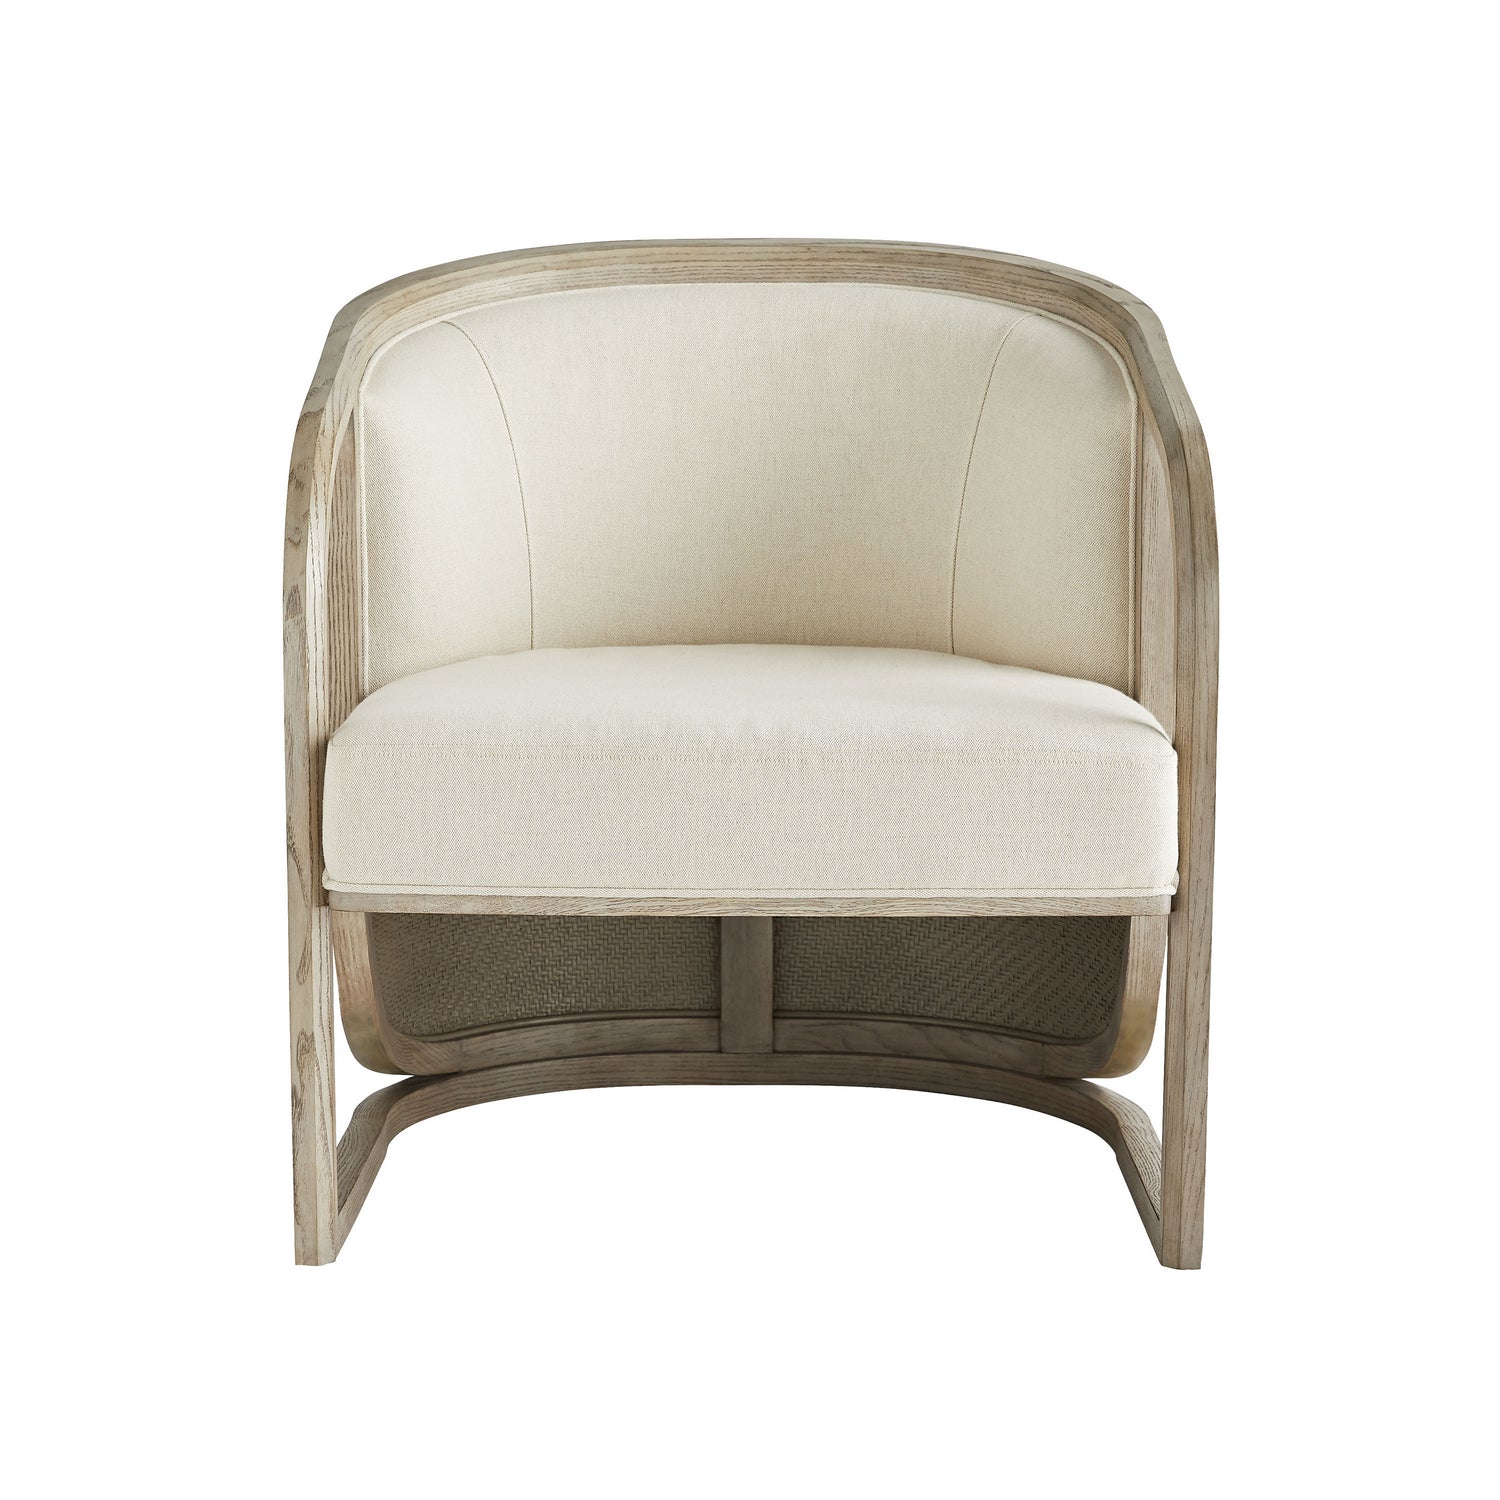 Lounge Chair from the Fortuna collection in Smoke finish